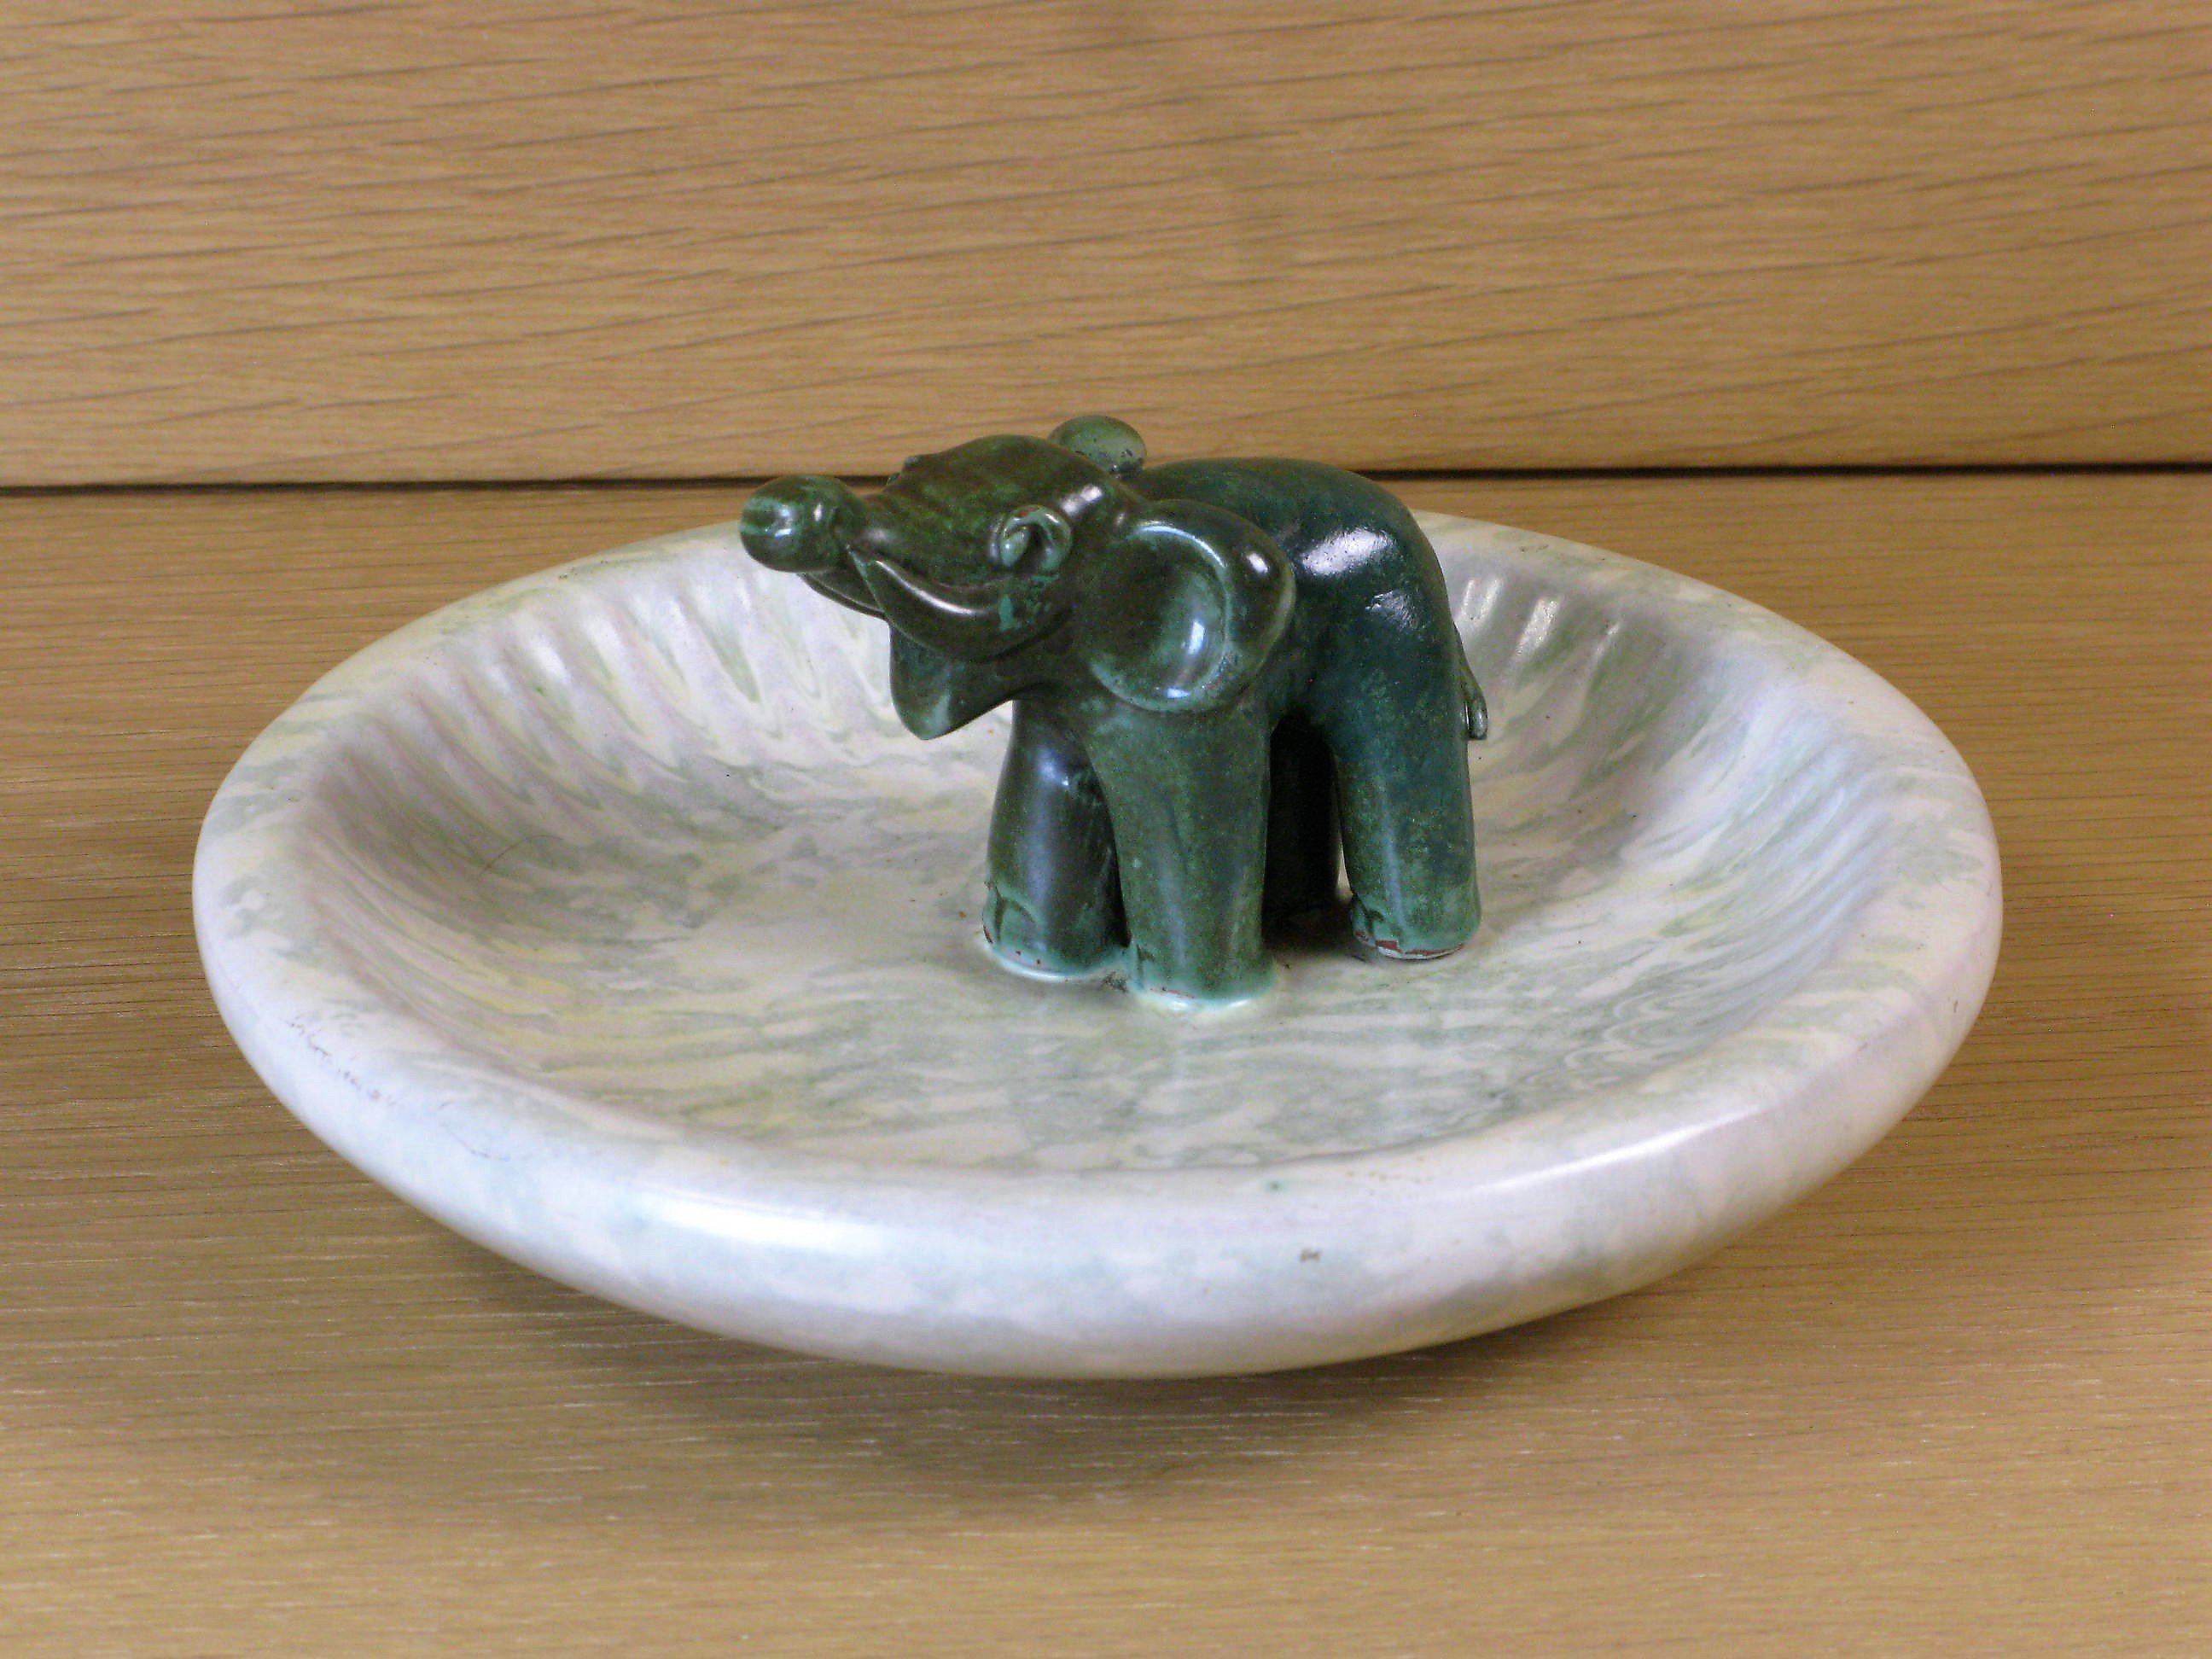 Dish with green elephant